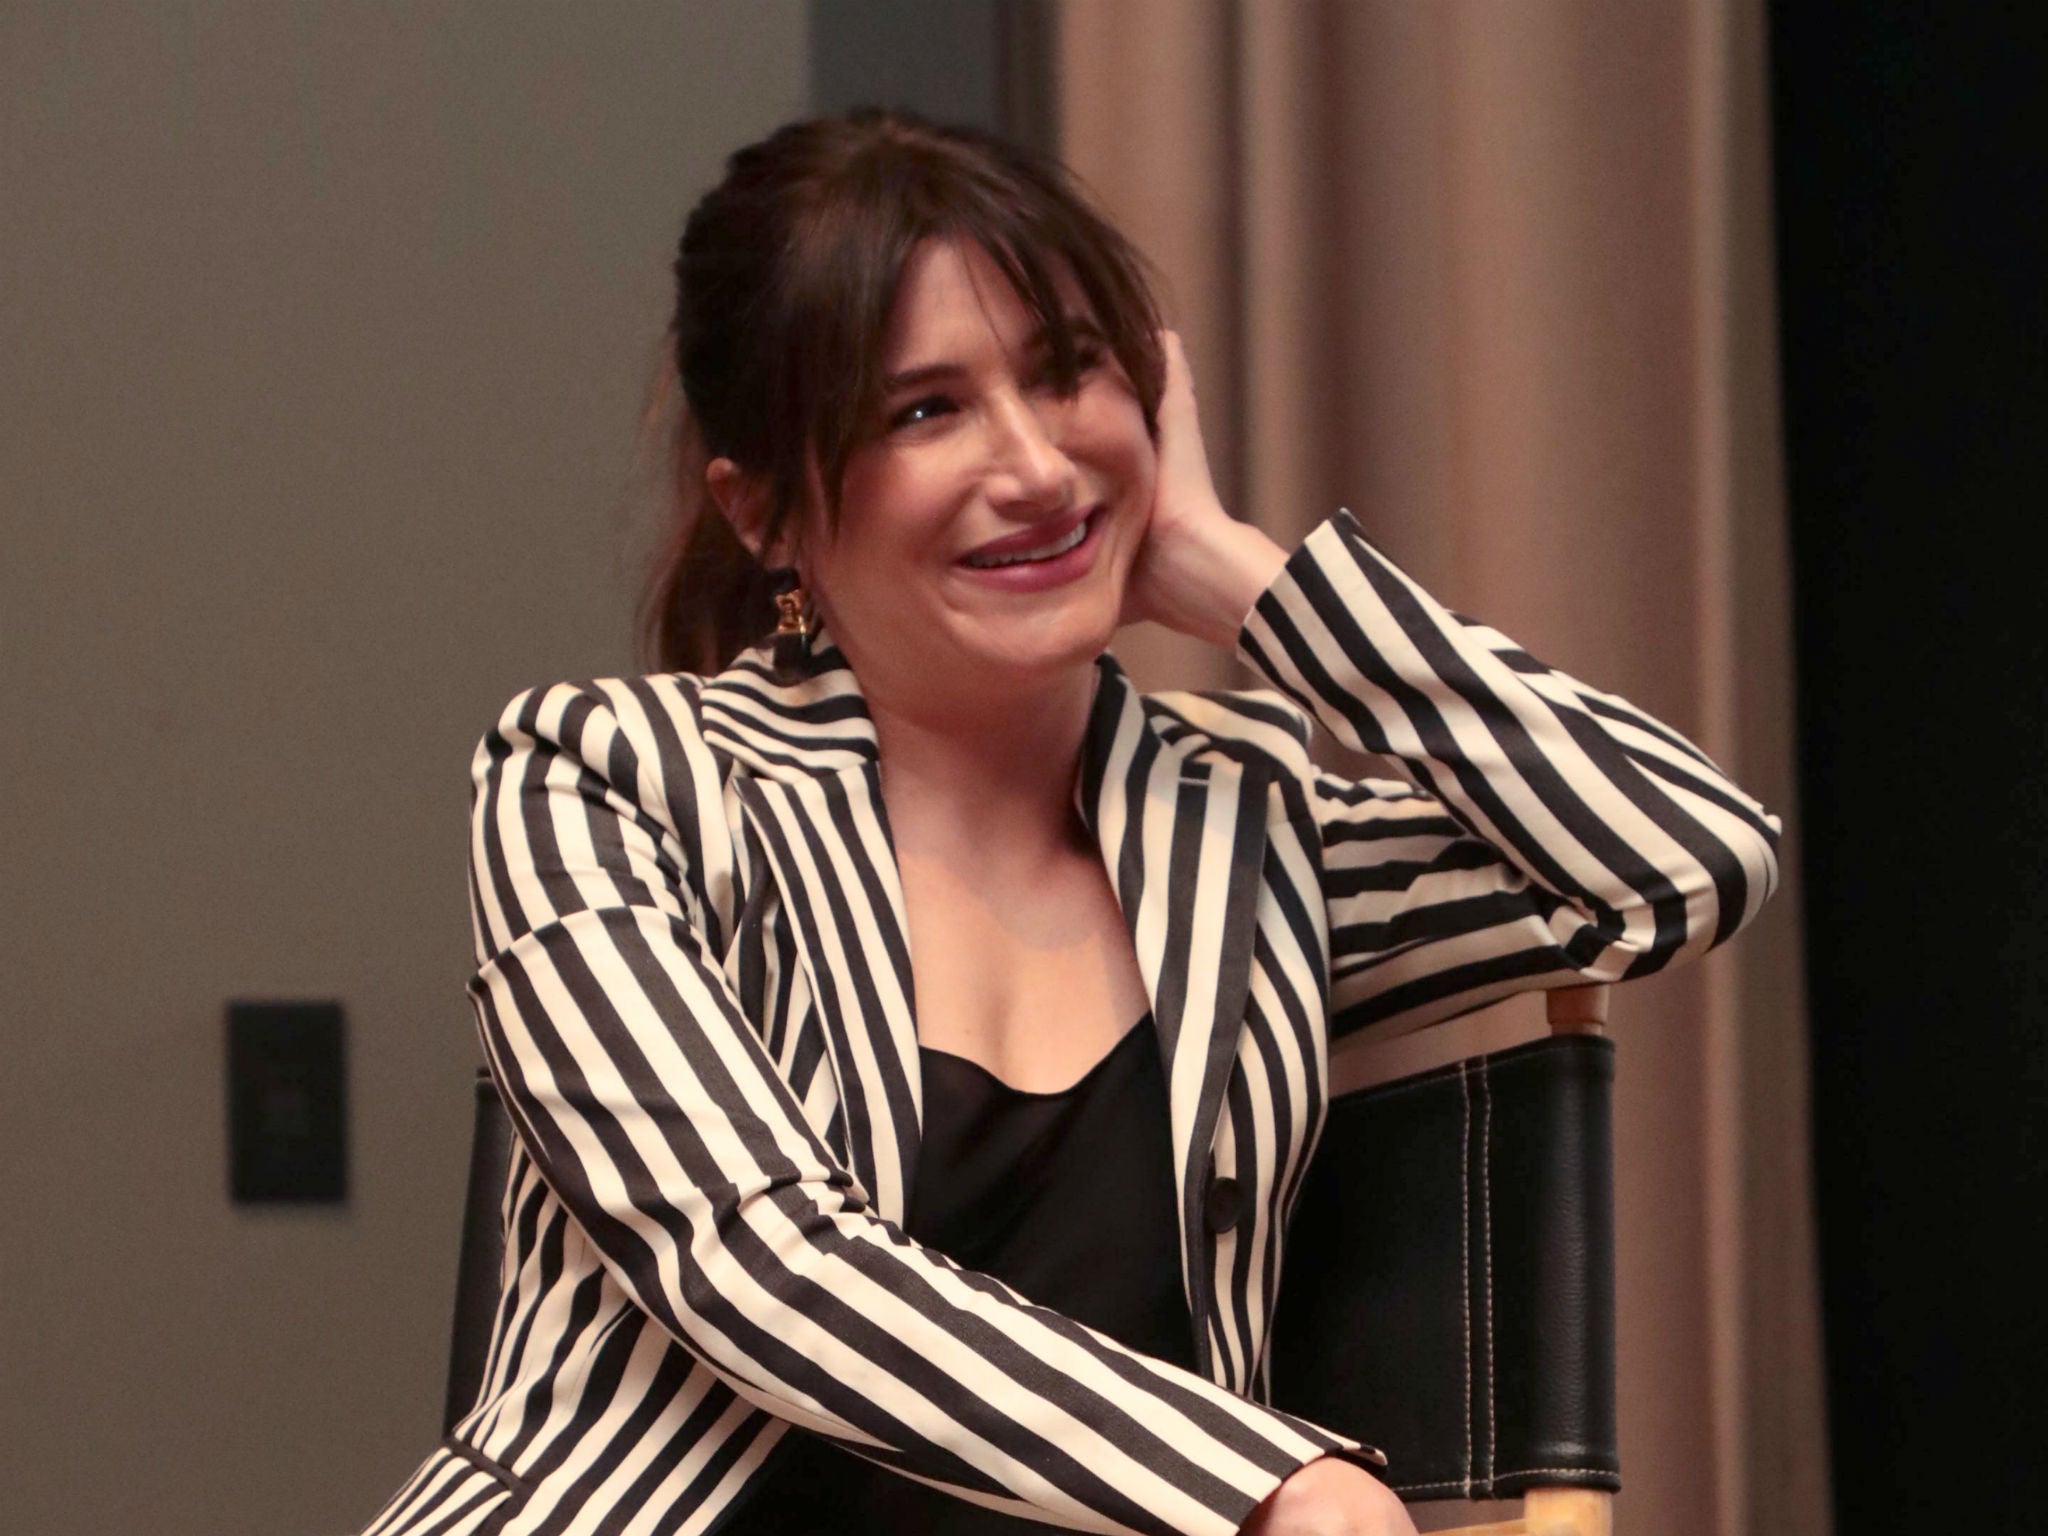 Women have been handed a power card Kathryn Hahn on Times Up, and why shes glad she never got stuck in push-up bra roles The Independent The Independent pic